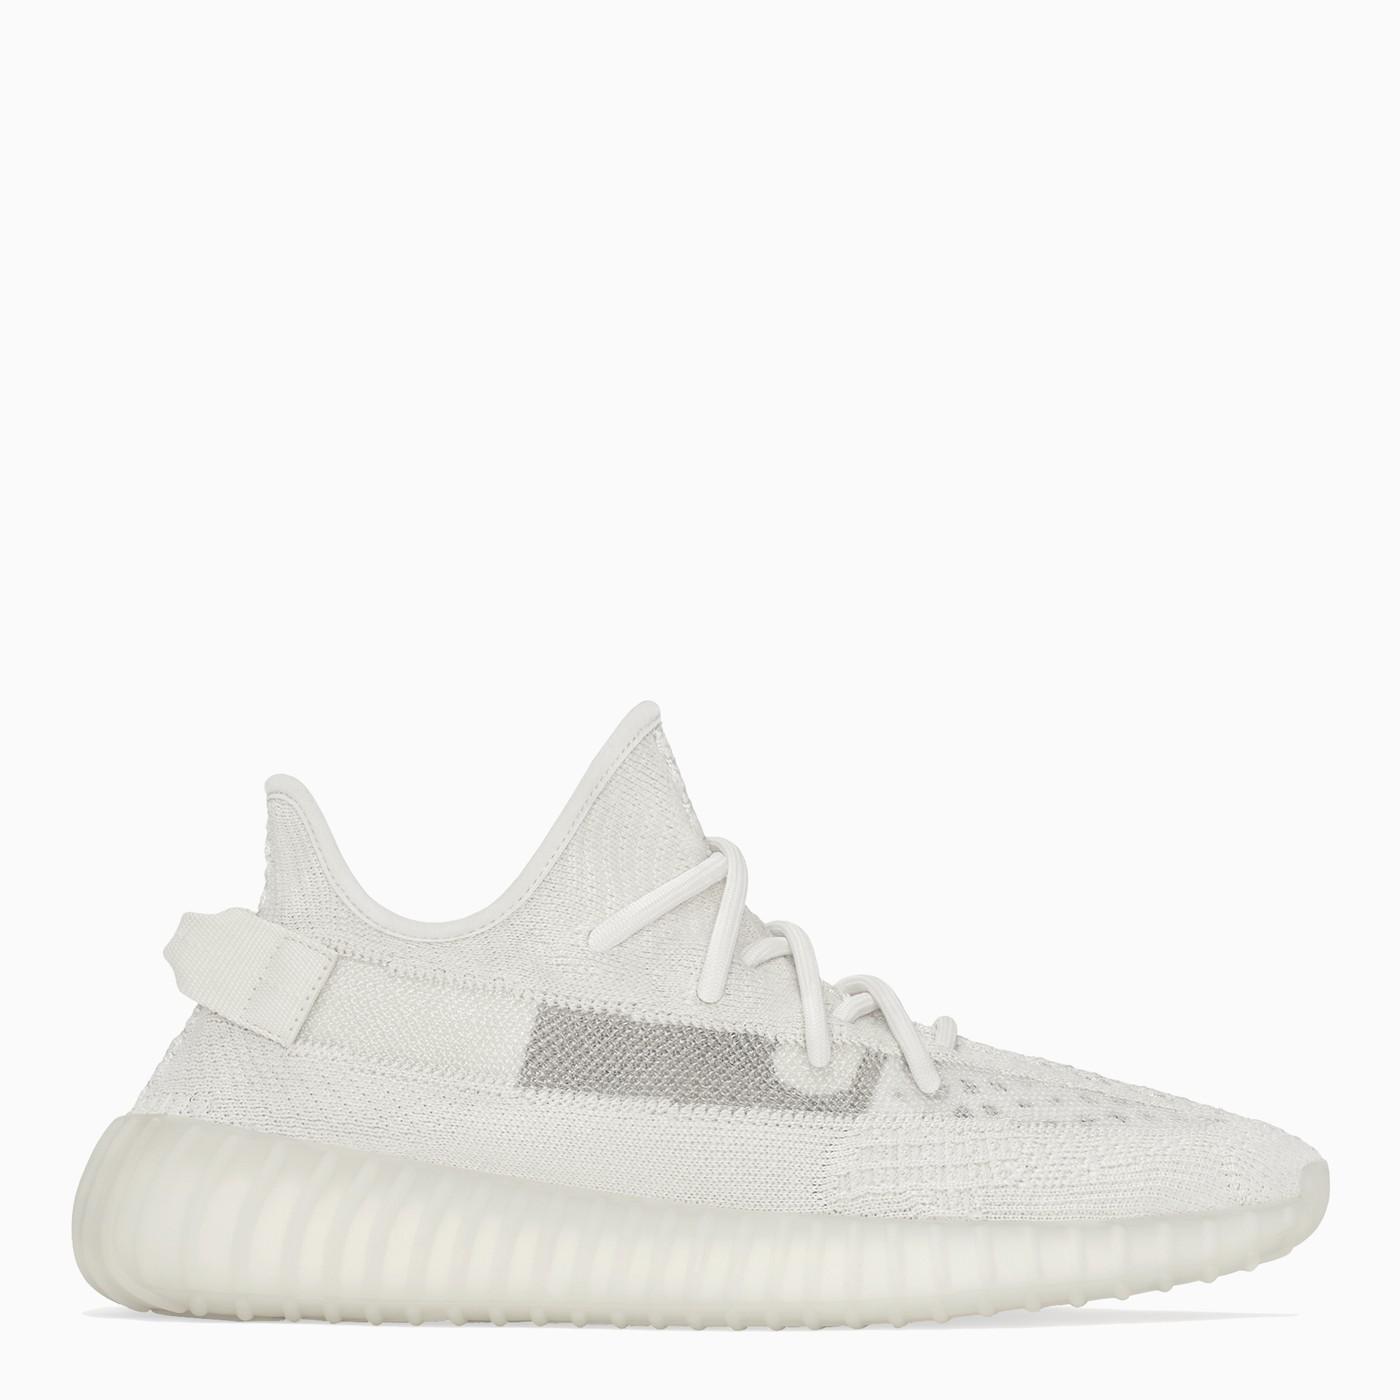 adidas Originals Yeezy Boost 350 V2 Bone Sneakers in White | Lyst